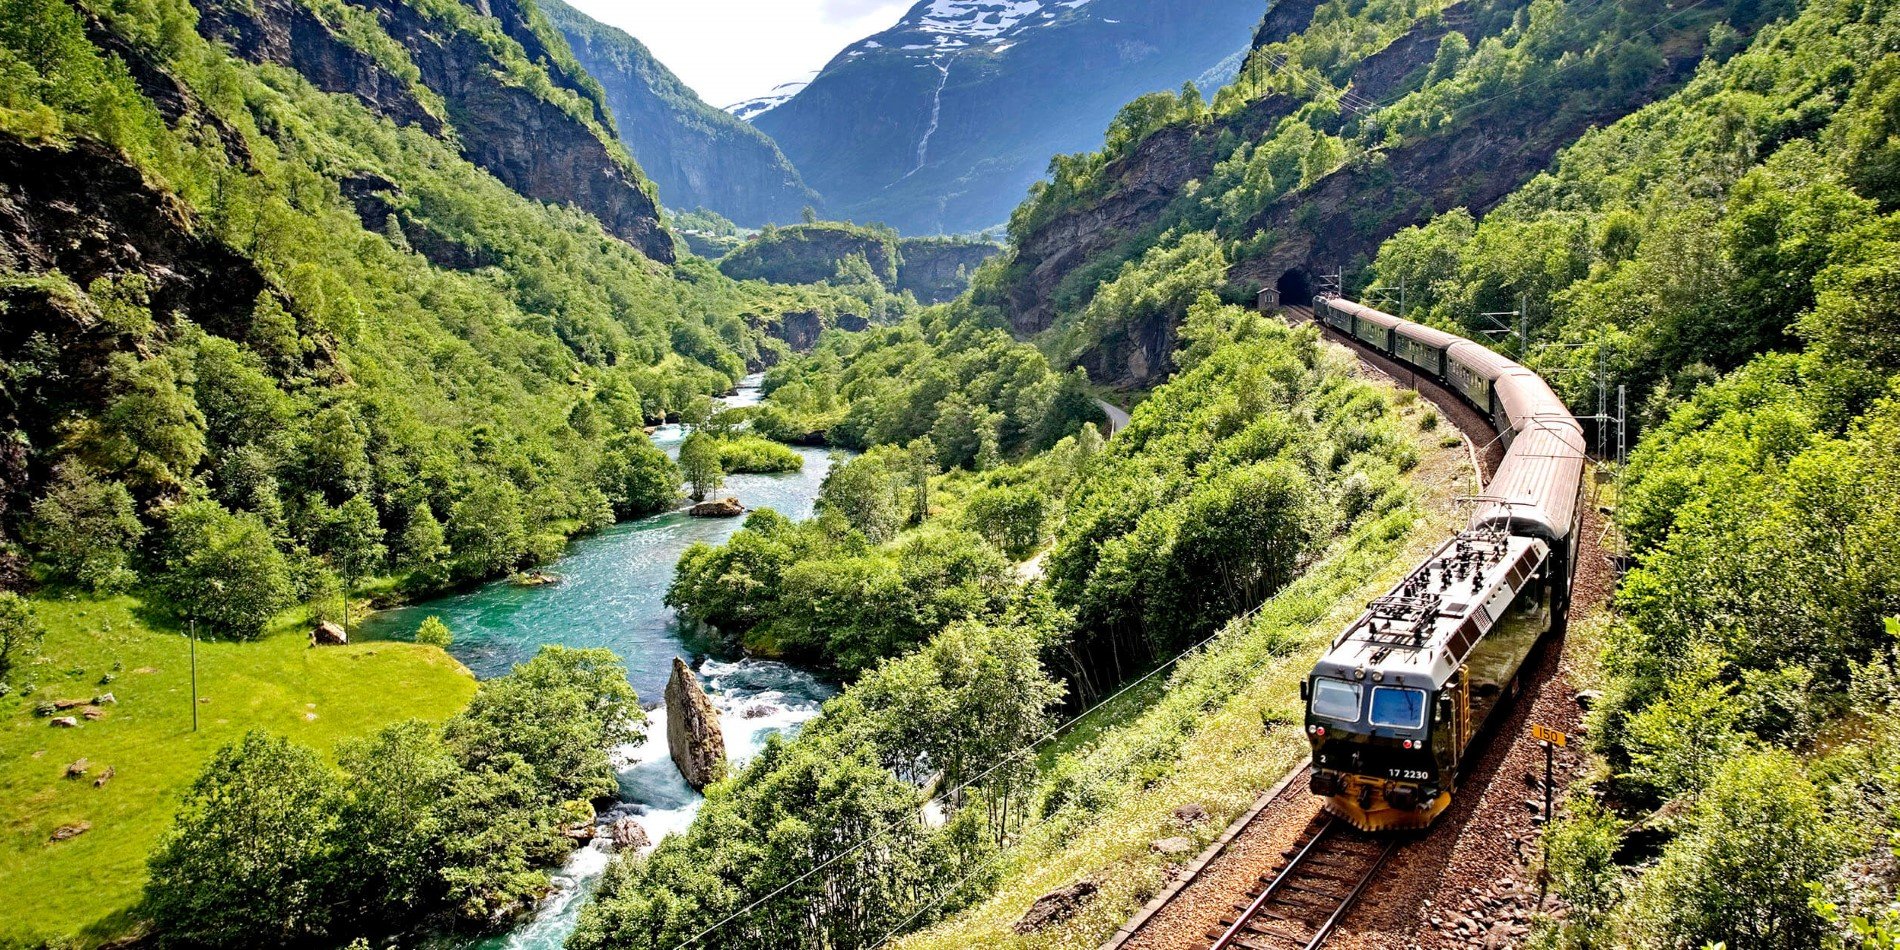 Flåm railway in a warm summer day, the trees are green and the river is blue